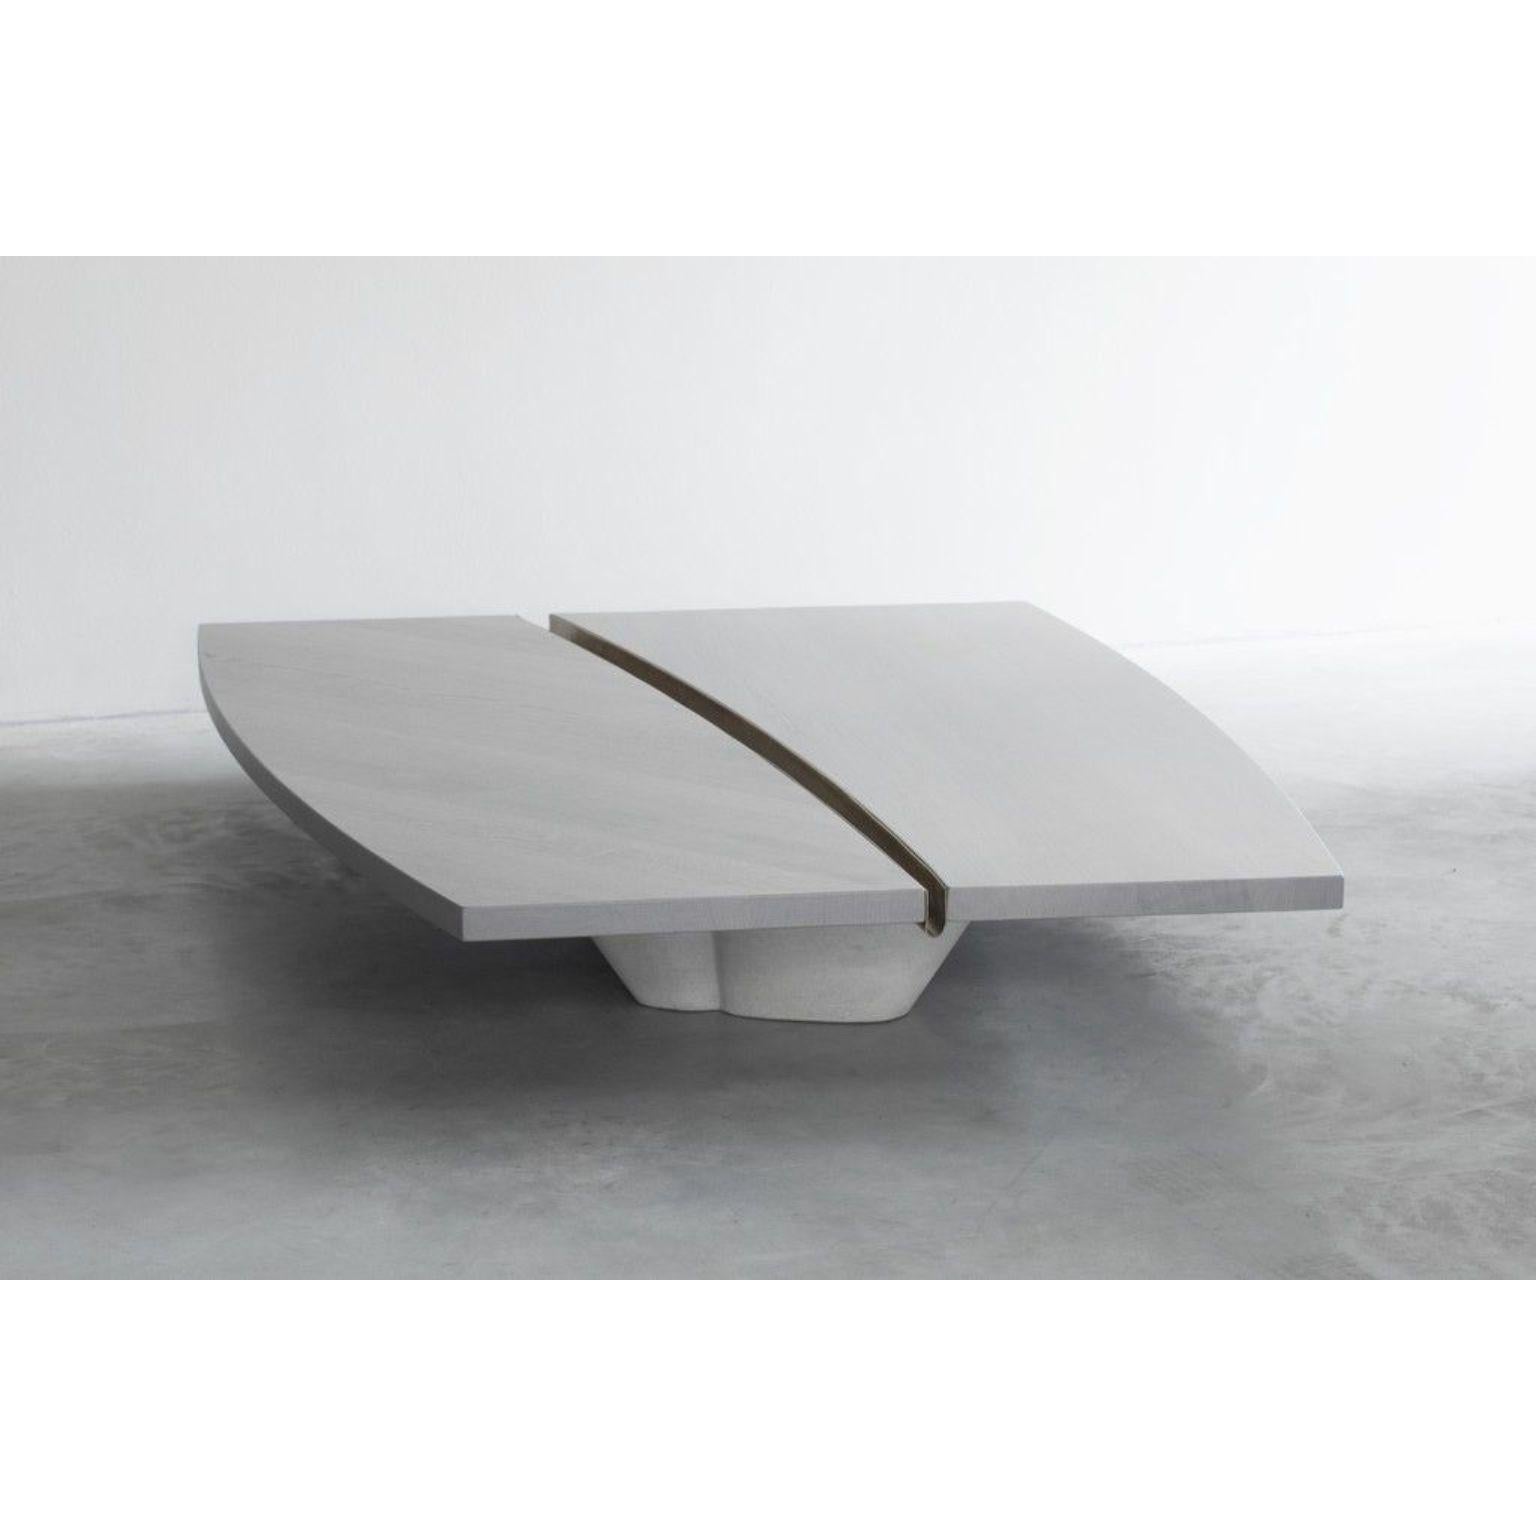 T-Elements low table with concrete bases by Van Rossum
Dimensions: D163 x W124 x H25 cm
Materials: Oak, concrete.

The wood is available in all standard Van Rossum colors, or in a matching finish to customer’s own sample. 

Low-set coffee or